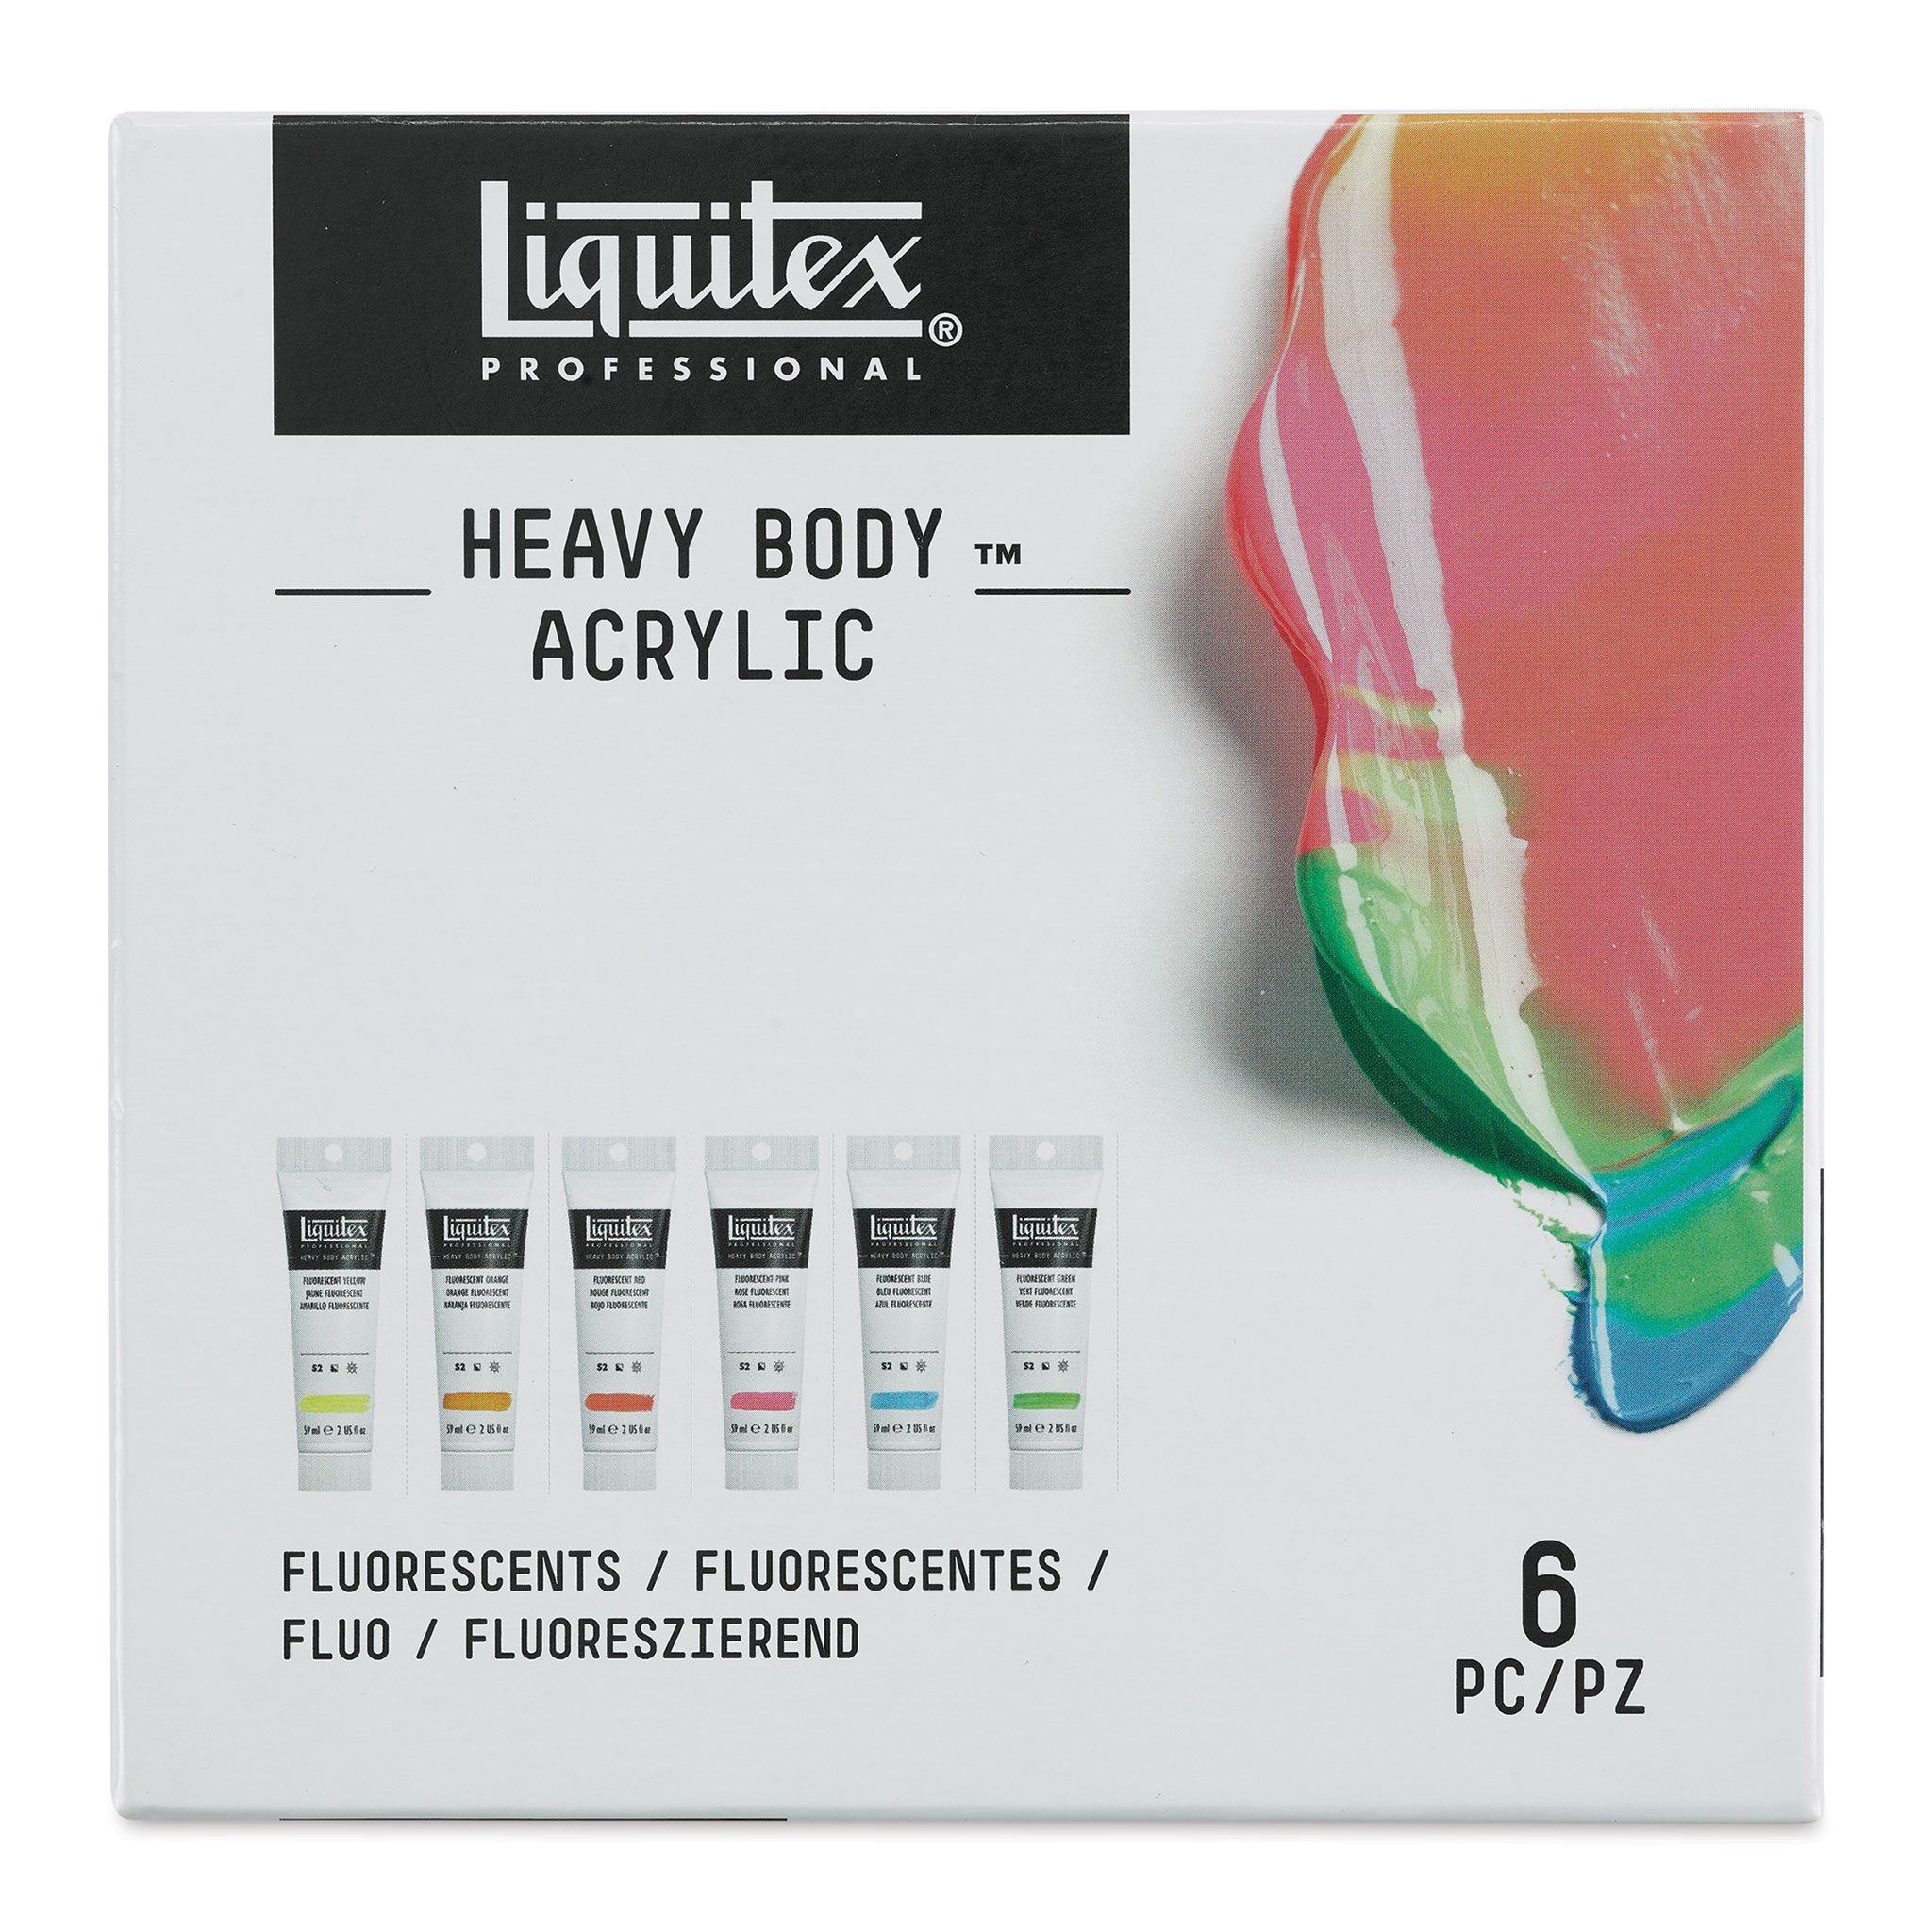 Liquitex Professional Heavy Body Acrylic Paints and Sets